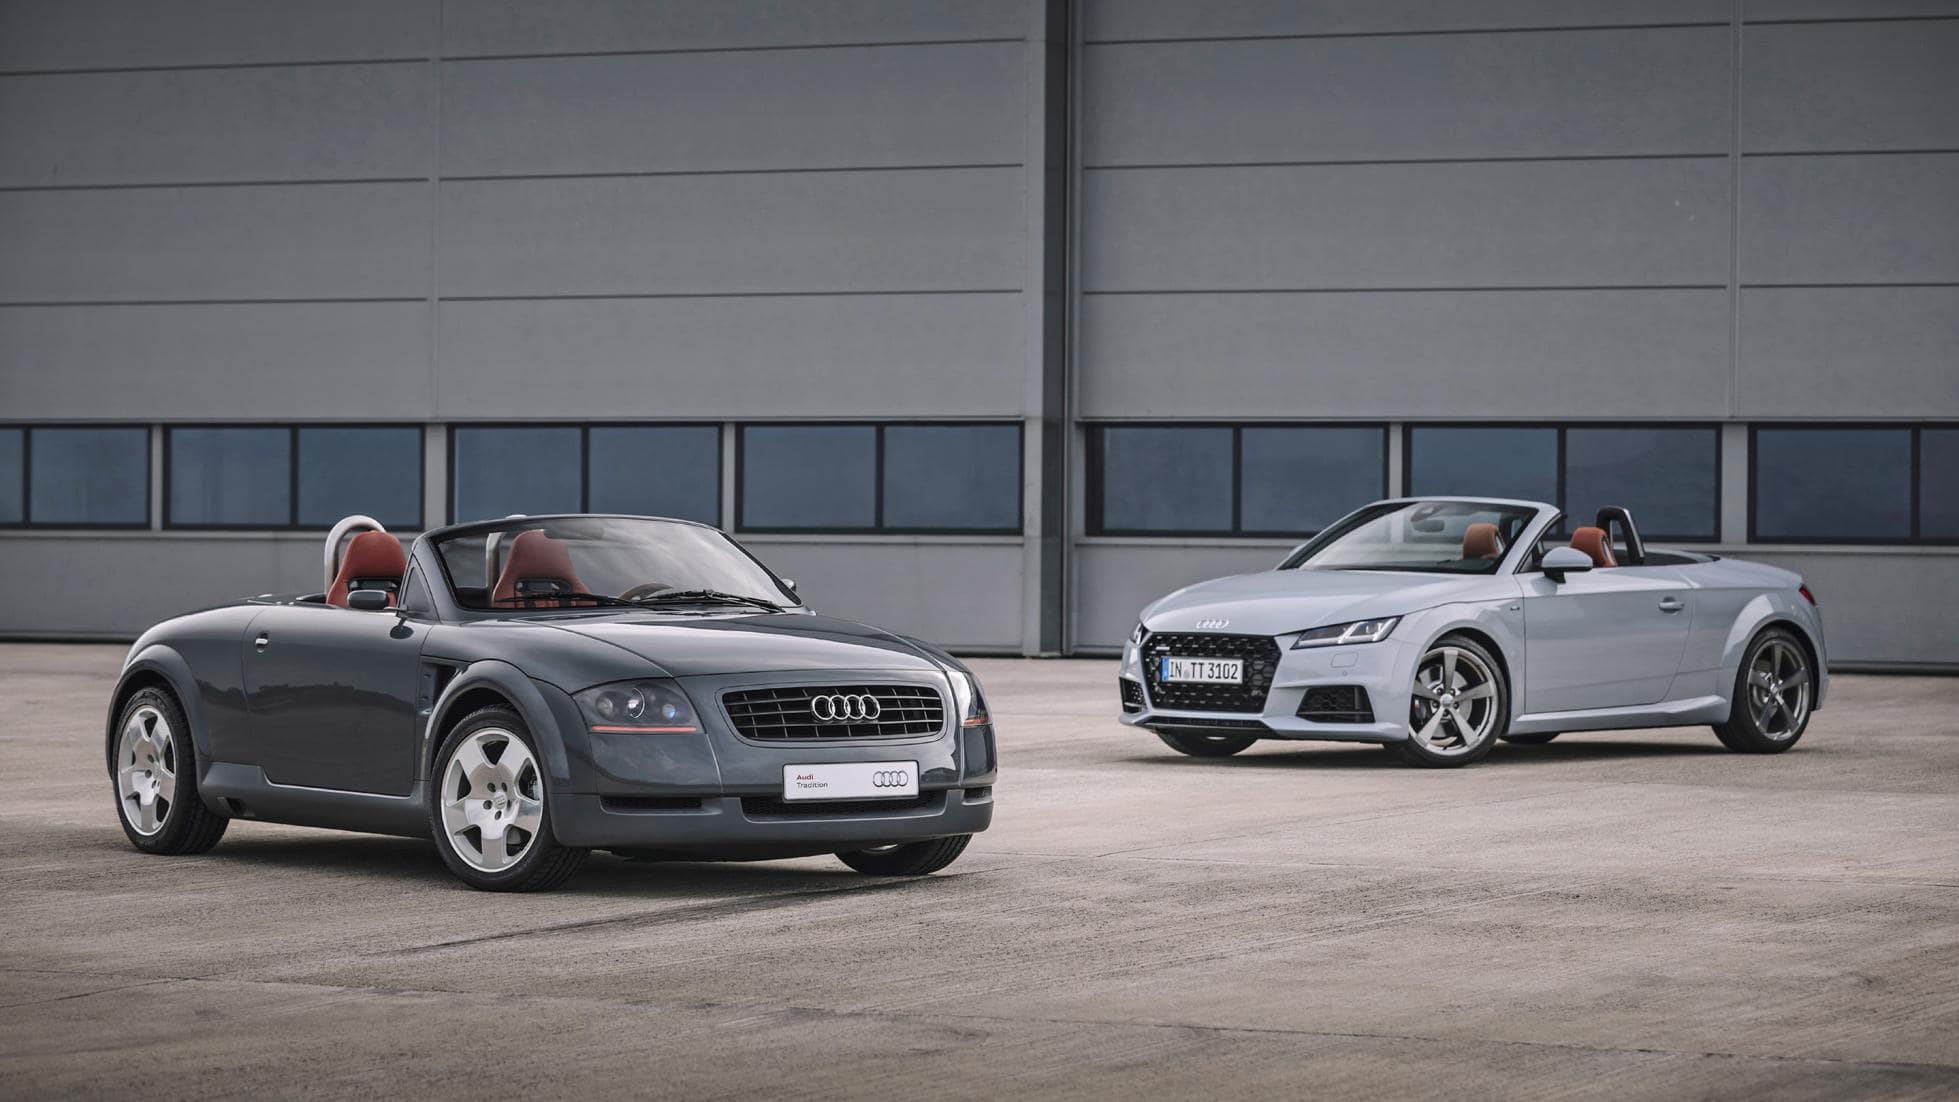 Audi TT celebrates 20th anniversary with limited edition coupe and roadster